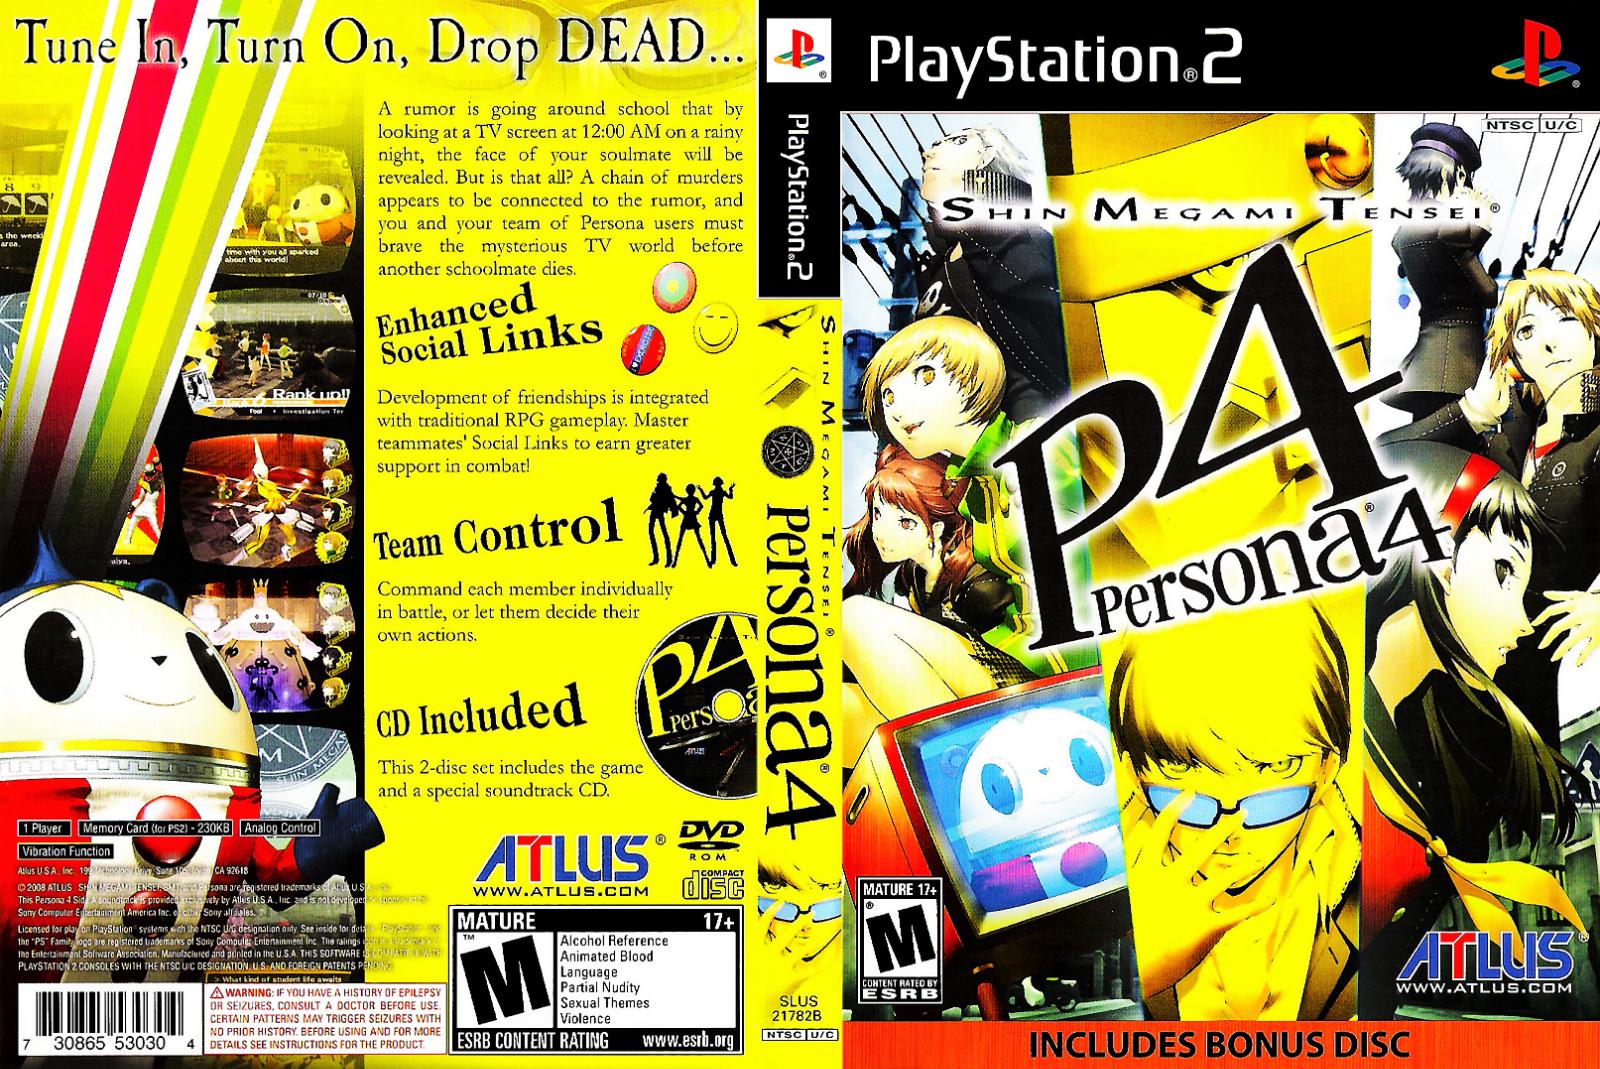 Persona 4 Prices Playstation 2 | Compare Loose, CIB & New Prices